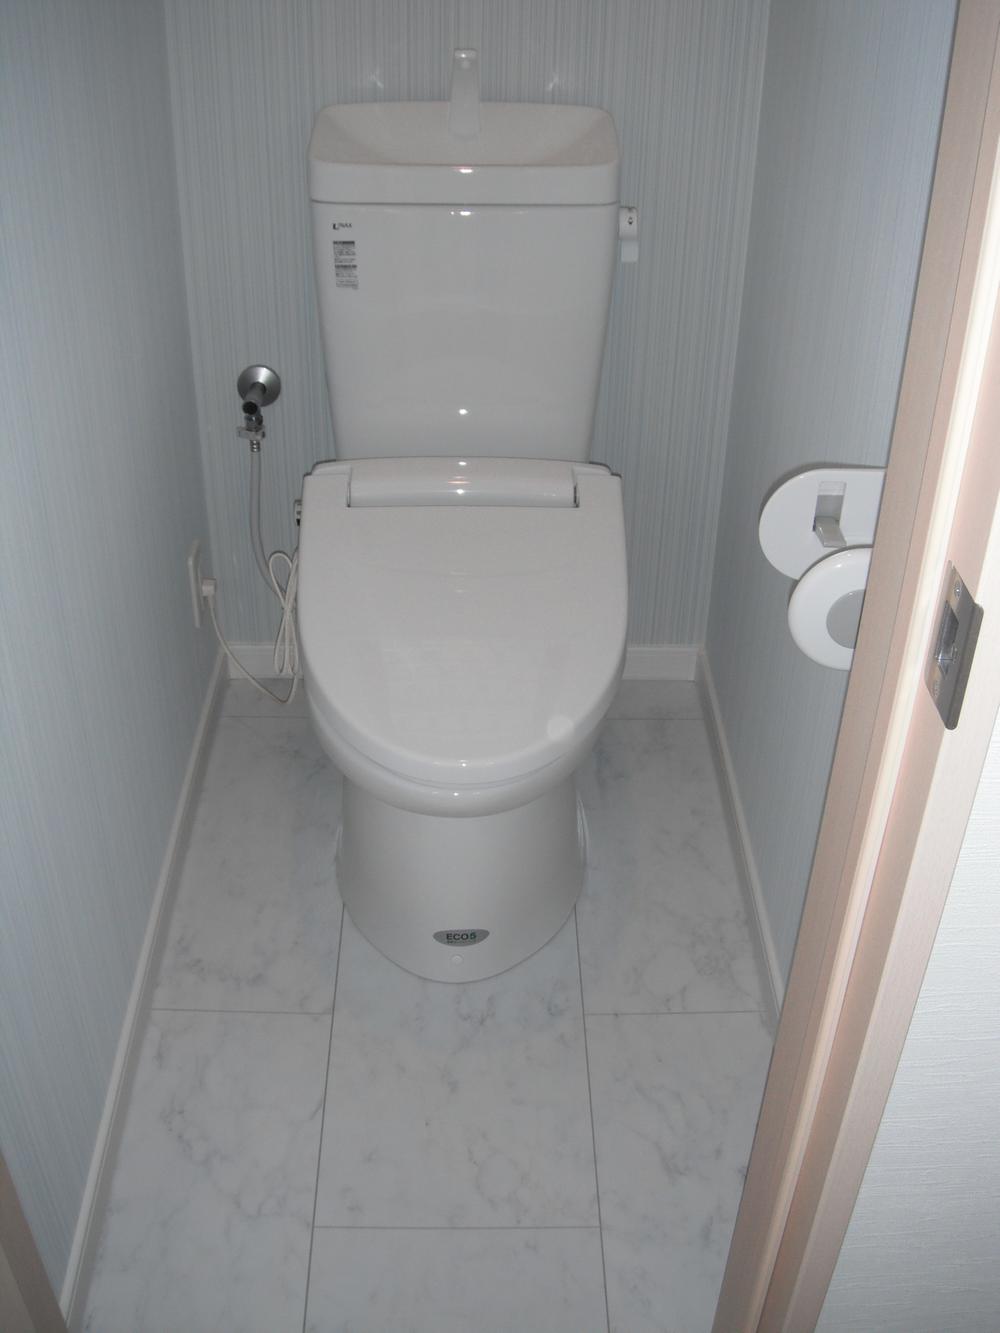 Other Equipment. Toilet same specifications Photos